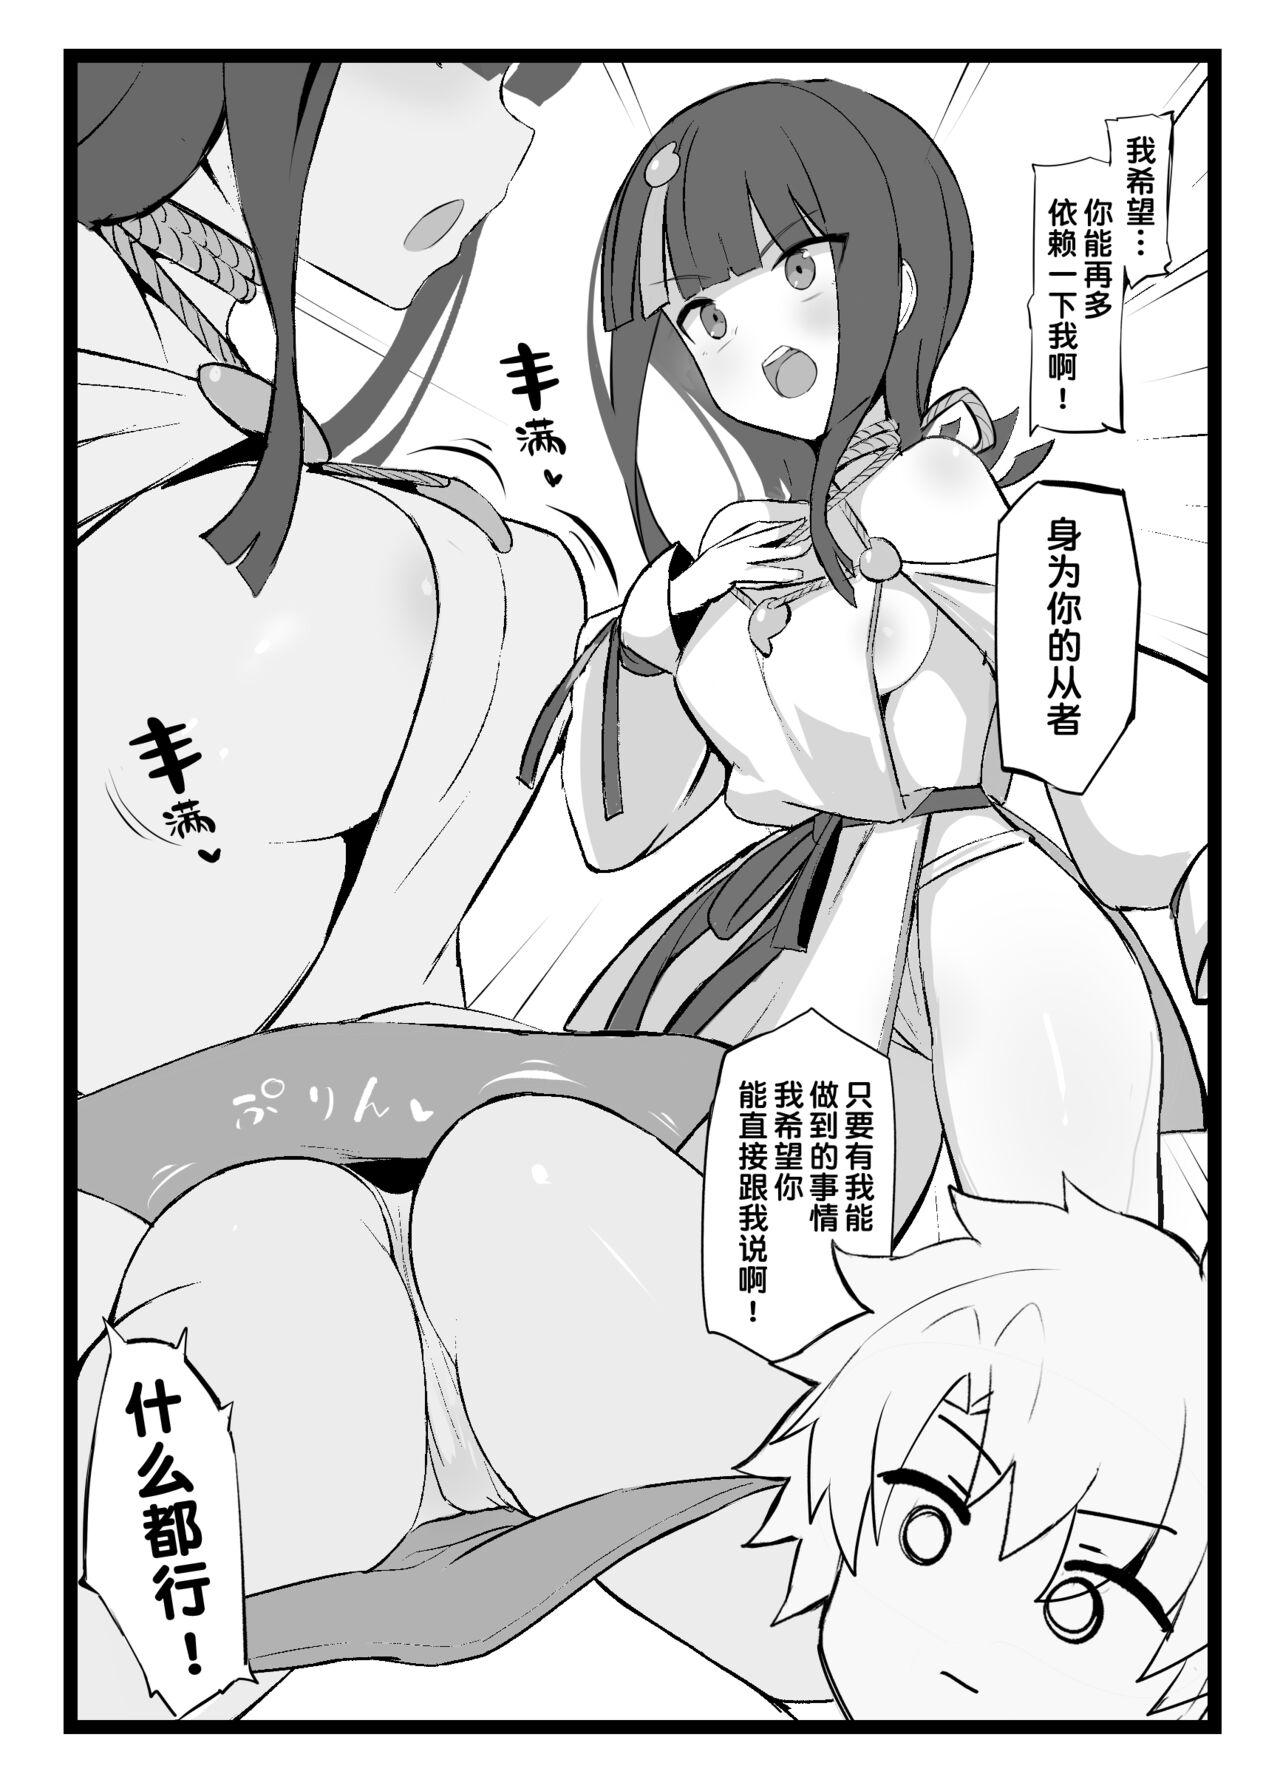 Freaky エリセちゃんととことん着衣エッチ本 - Fate grand order Big Cock - Page 4